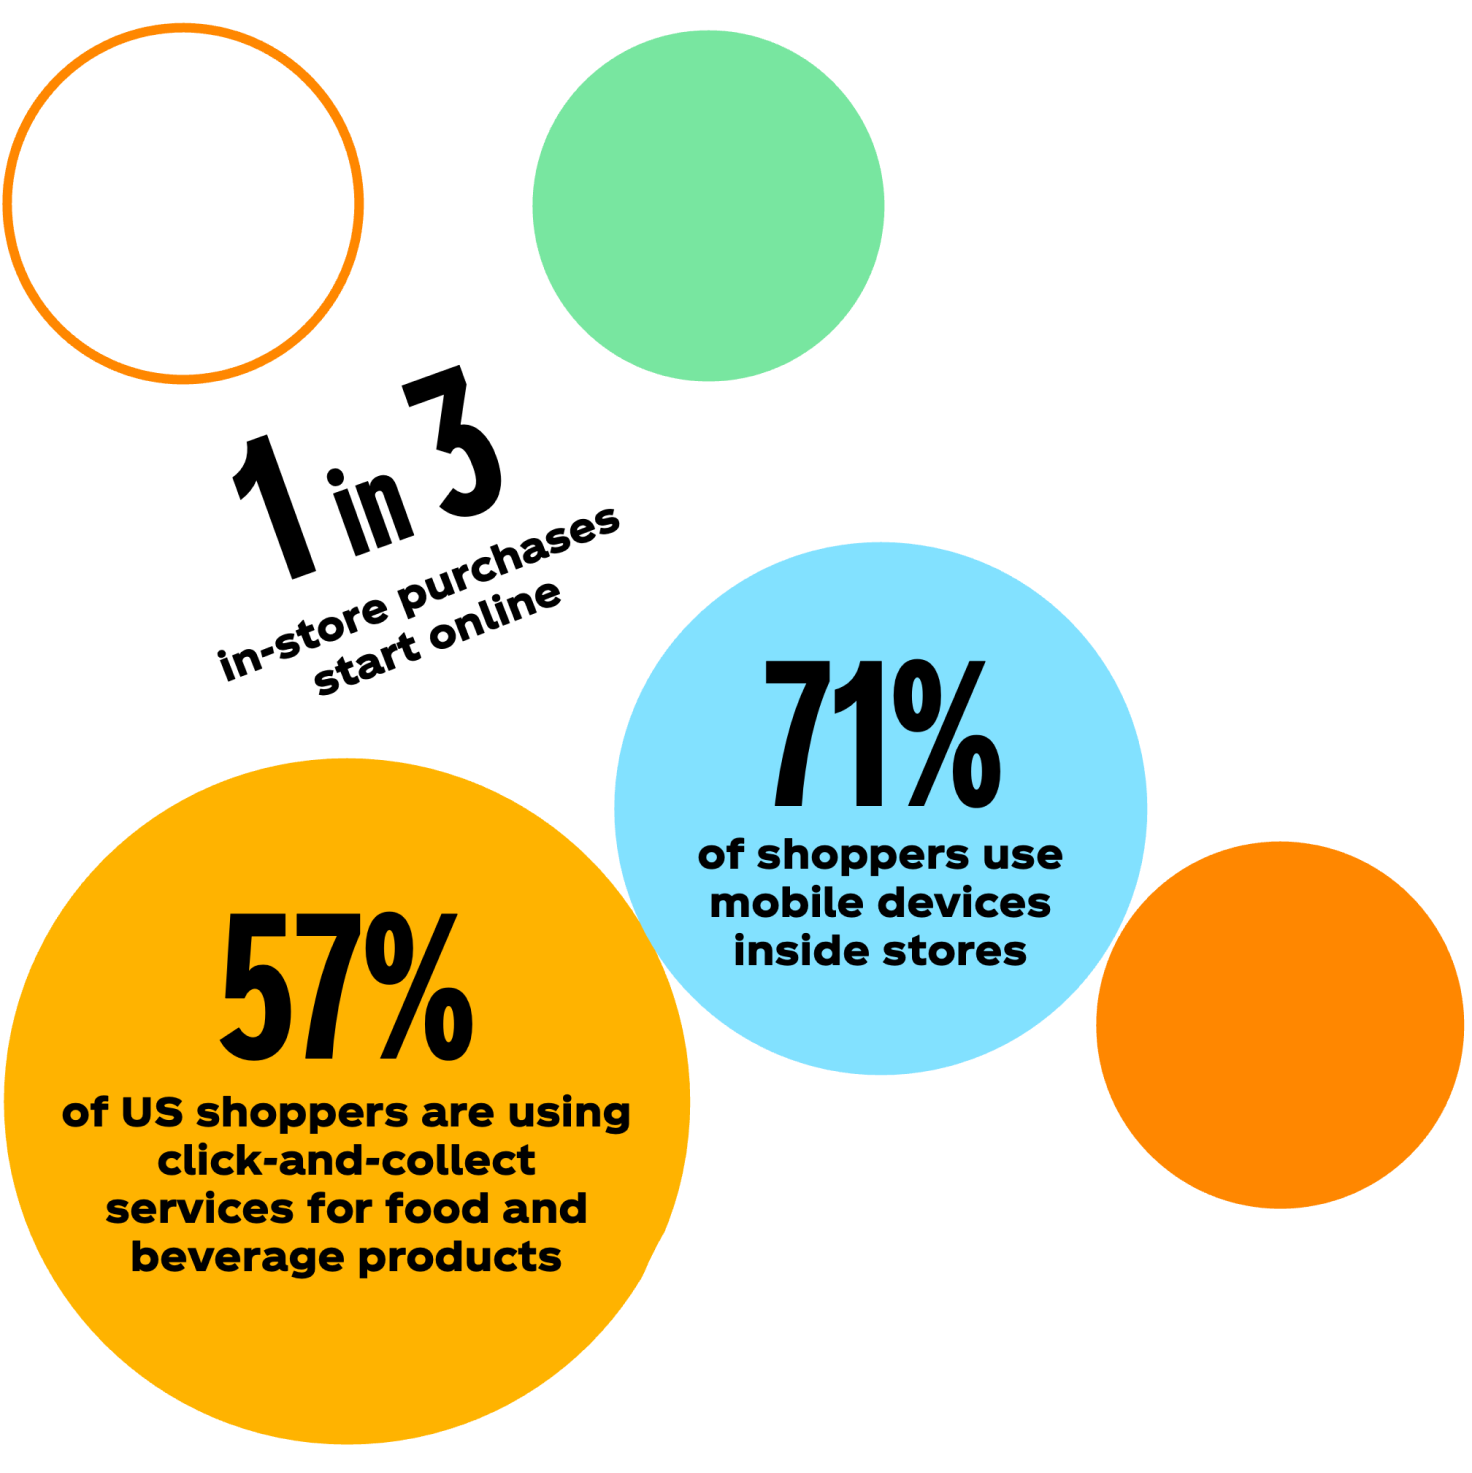 Infographic showing the following information: 87% of shoppers begin product searches on digital channels, 1 in 3 in-store purchases start online, 71% of shoppers use mobile devices inside stores, and 57% of US shoppers are using click-and-collect services for food and beverage products.